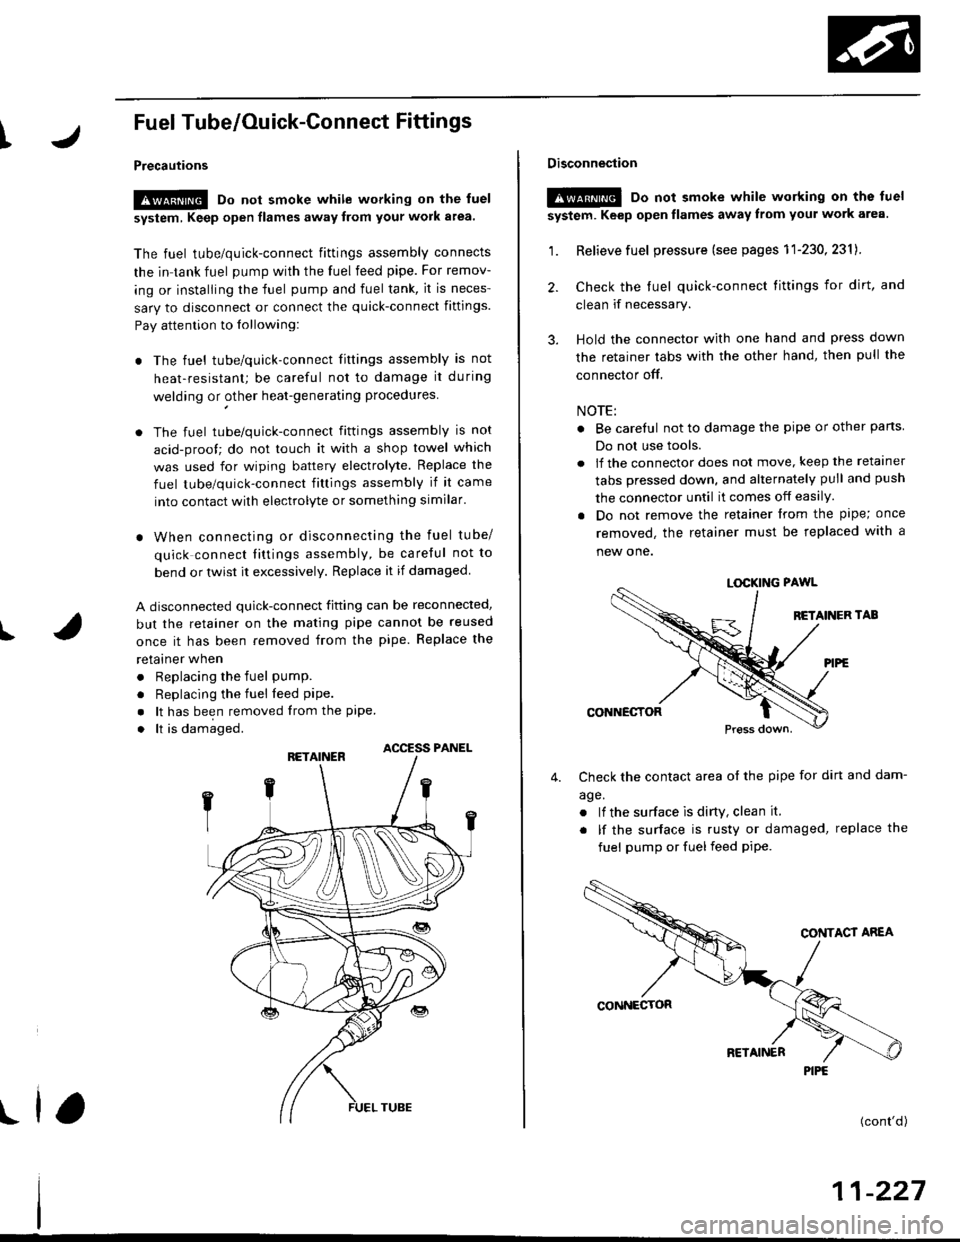 HONDA CIVIC 1996 6.G Workshop Manual I
Fuel Tube/Ouick-Gonnect Fittings
Precautions
!@ Do not smoke while working on the fuel
system, Keep open flames away from your work a.ea
The fuel tube/quick-connect fittings assembly connects
the i